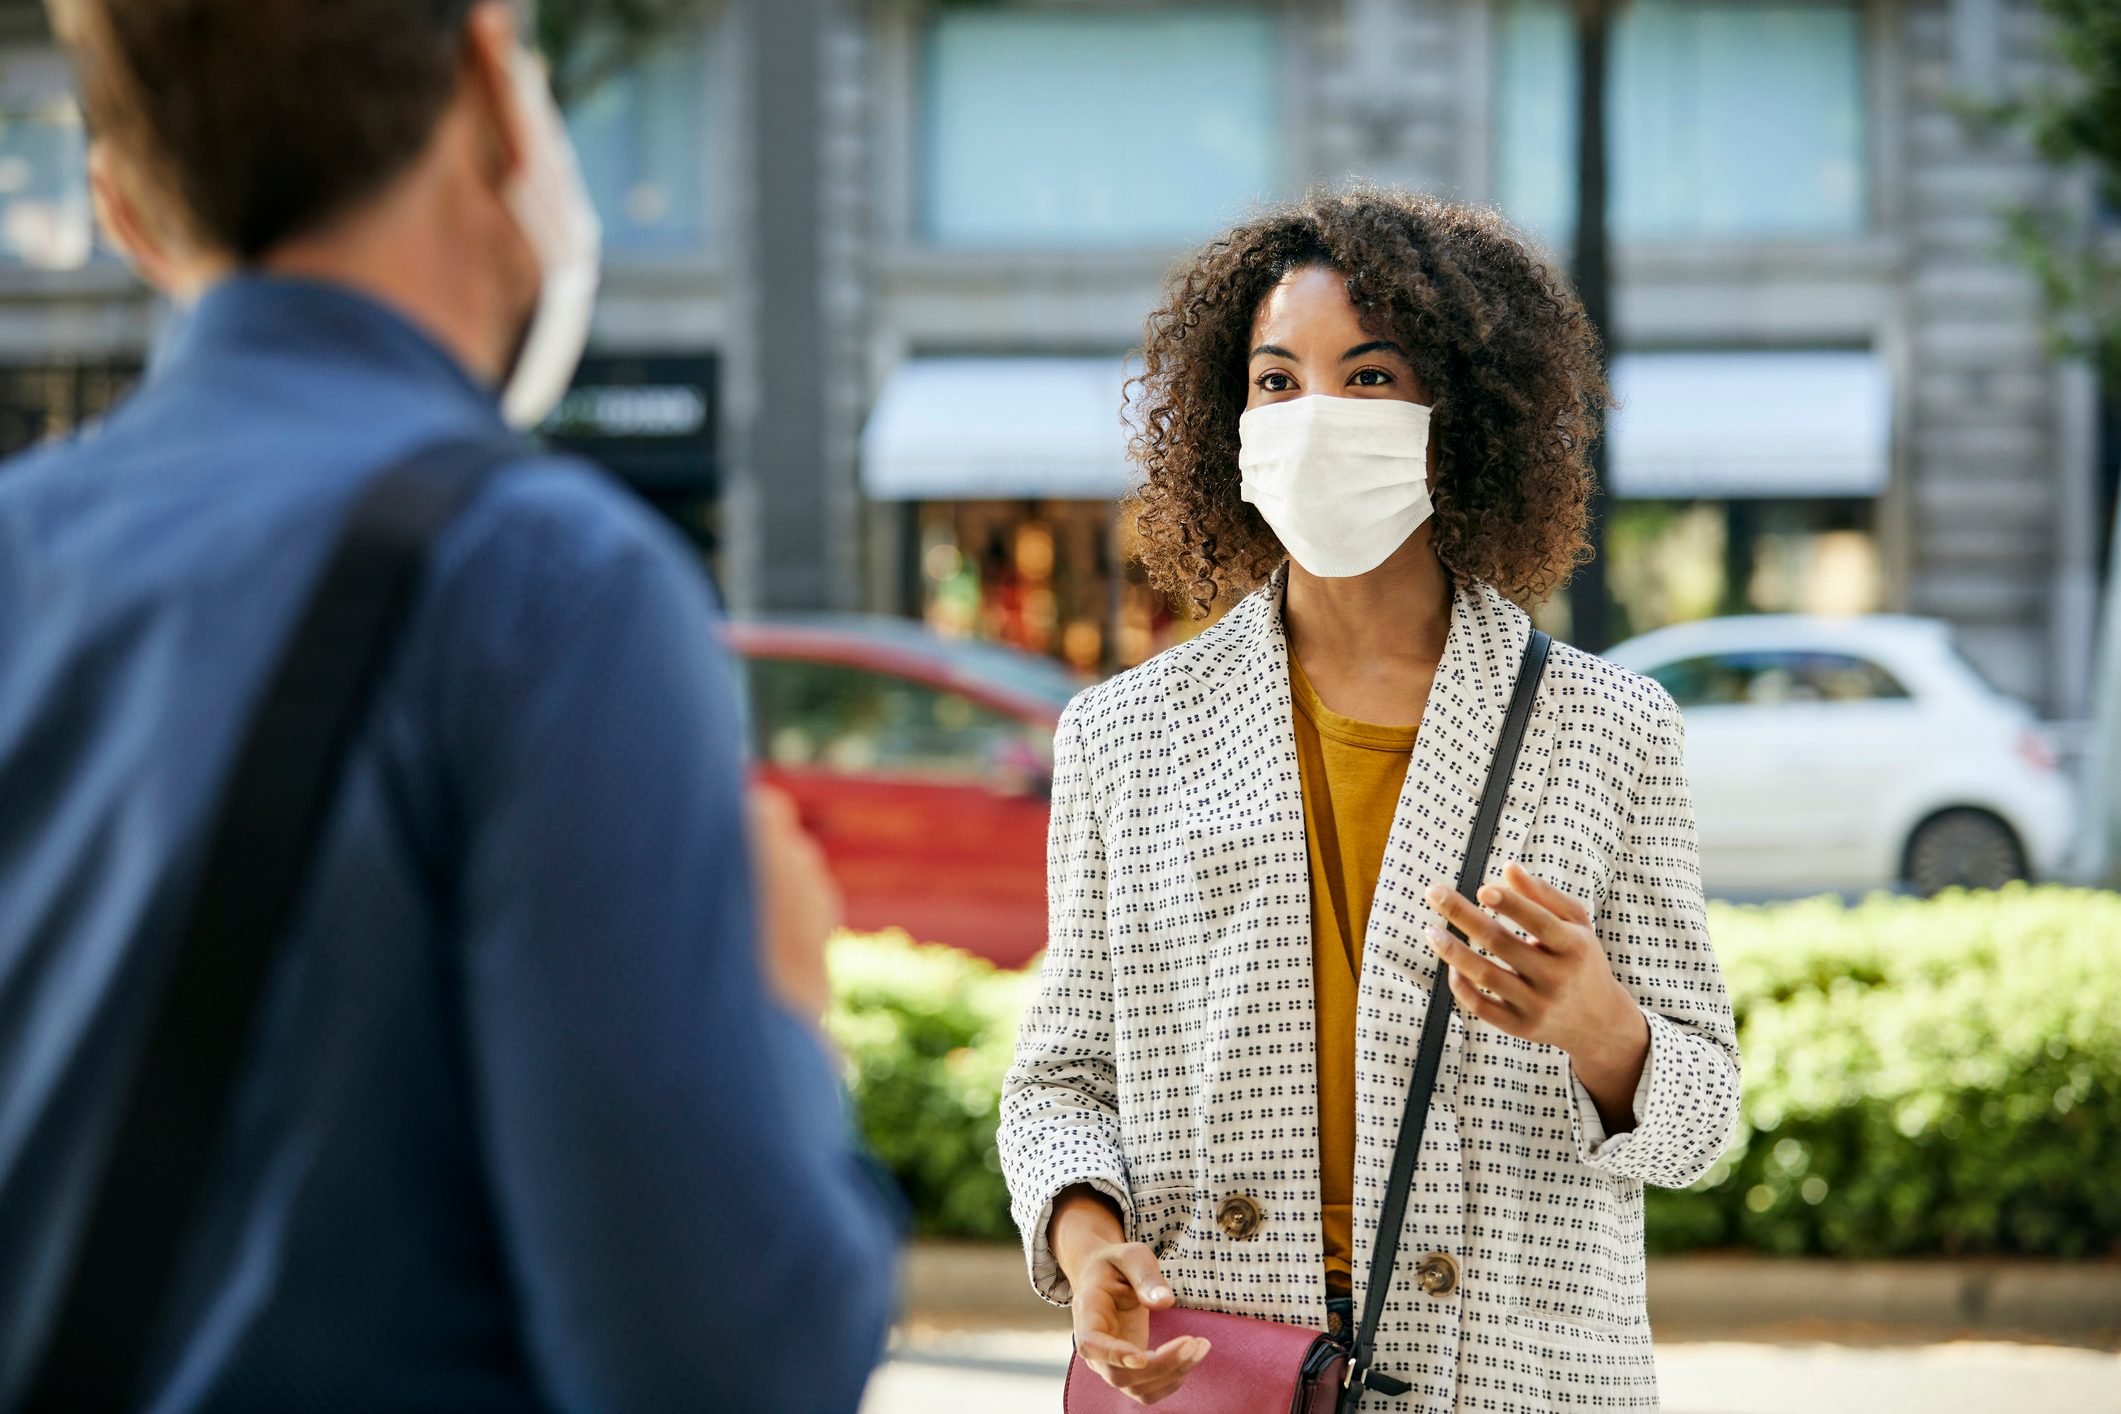 Businesswoman Wearing Protective Face Mask Talking To Male Coworker During COVID-19 Pandemic In City